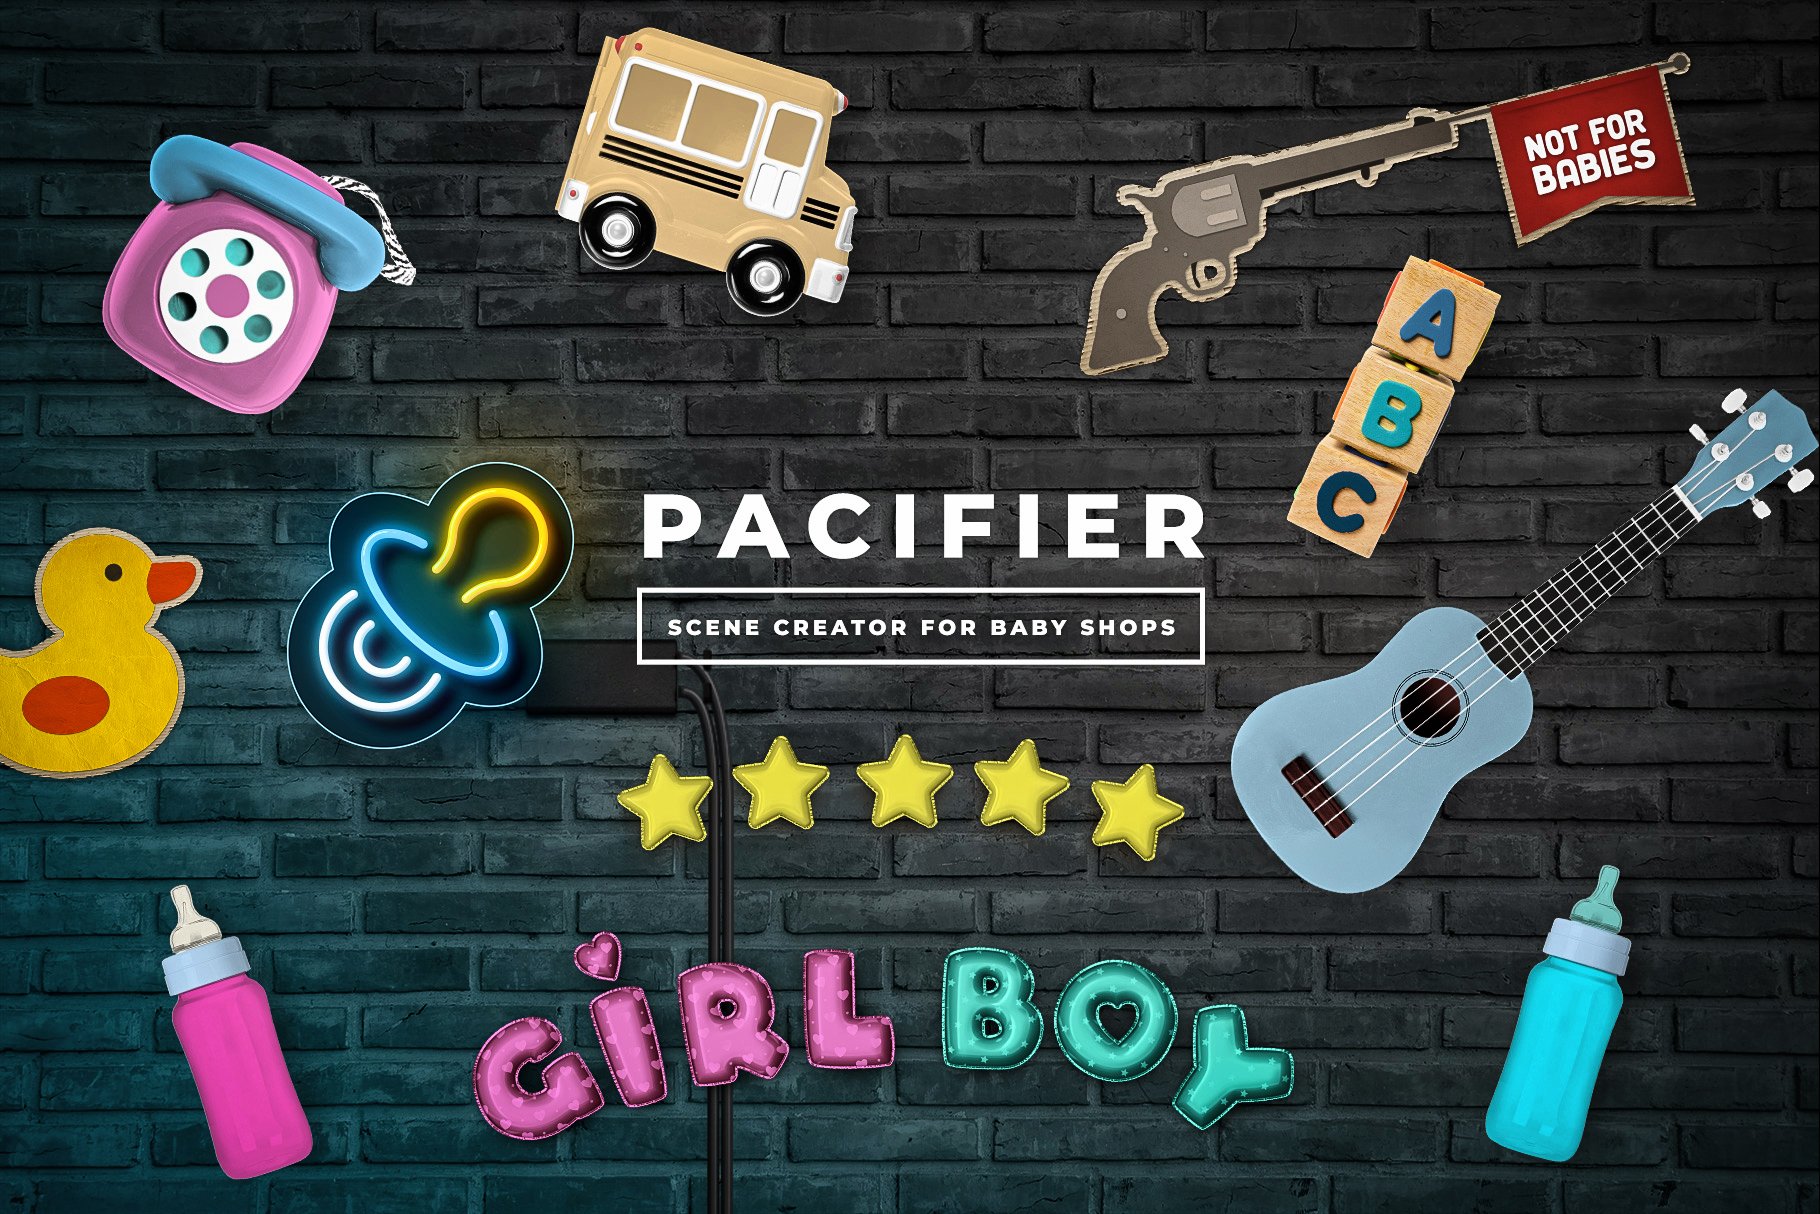 Pacifier - Baby Shop Scene Creator cover image.